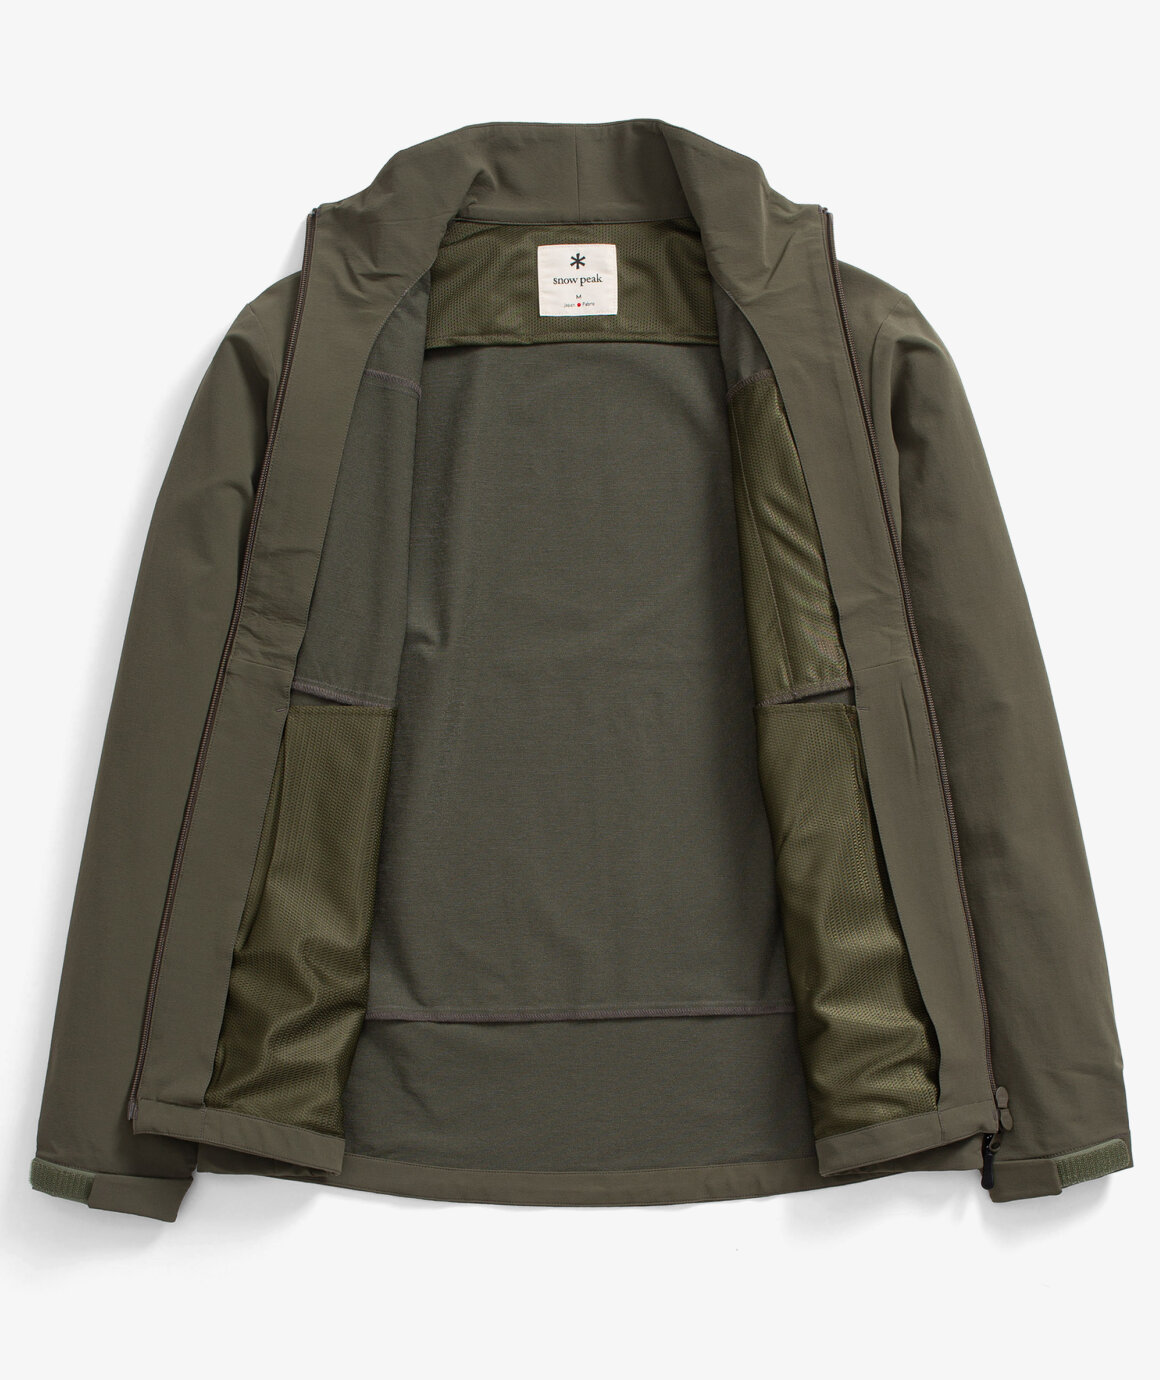 Norse Store | Shipping Worldwide - Snow Peak DWR Comfort Jacket - Olive